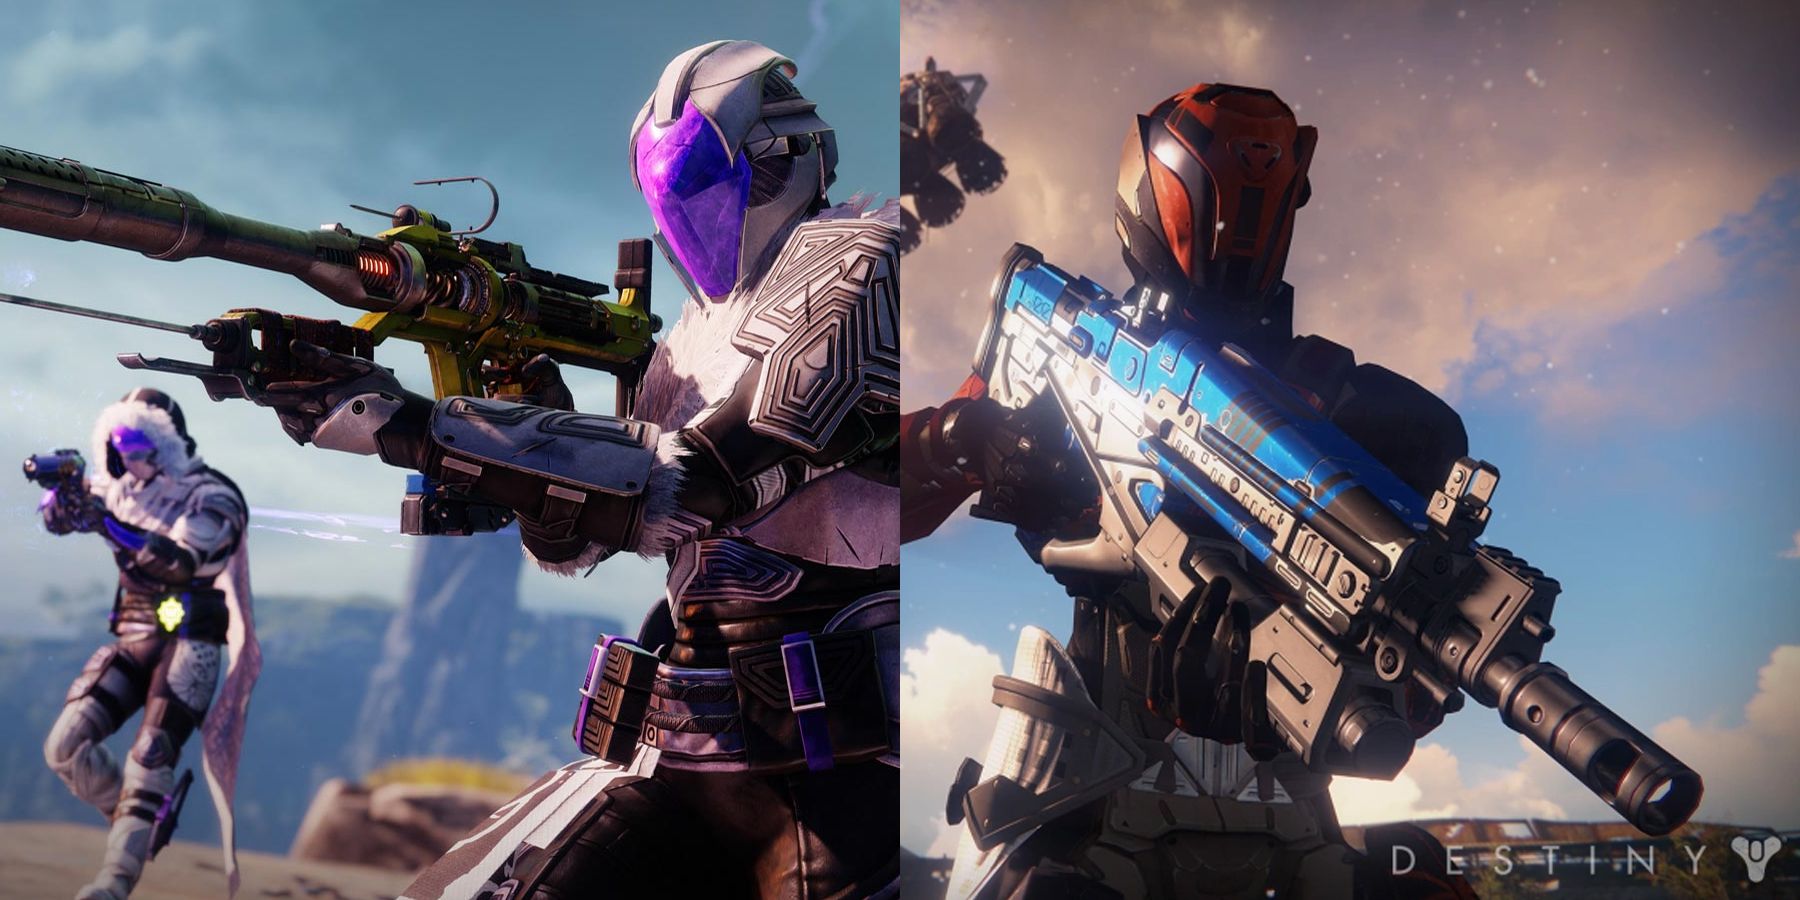 Featured - Destiny 2 Misconceptions